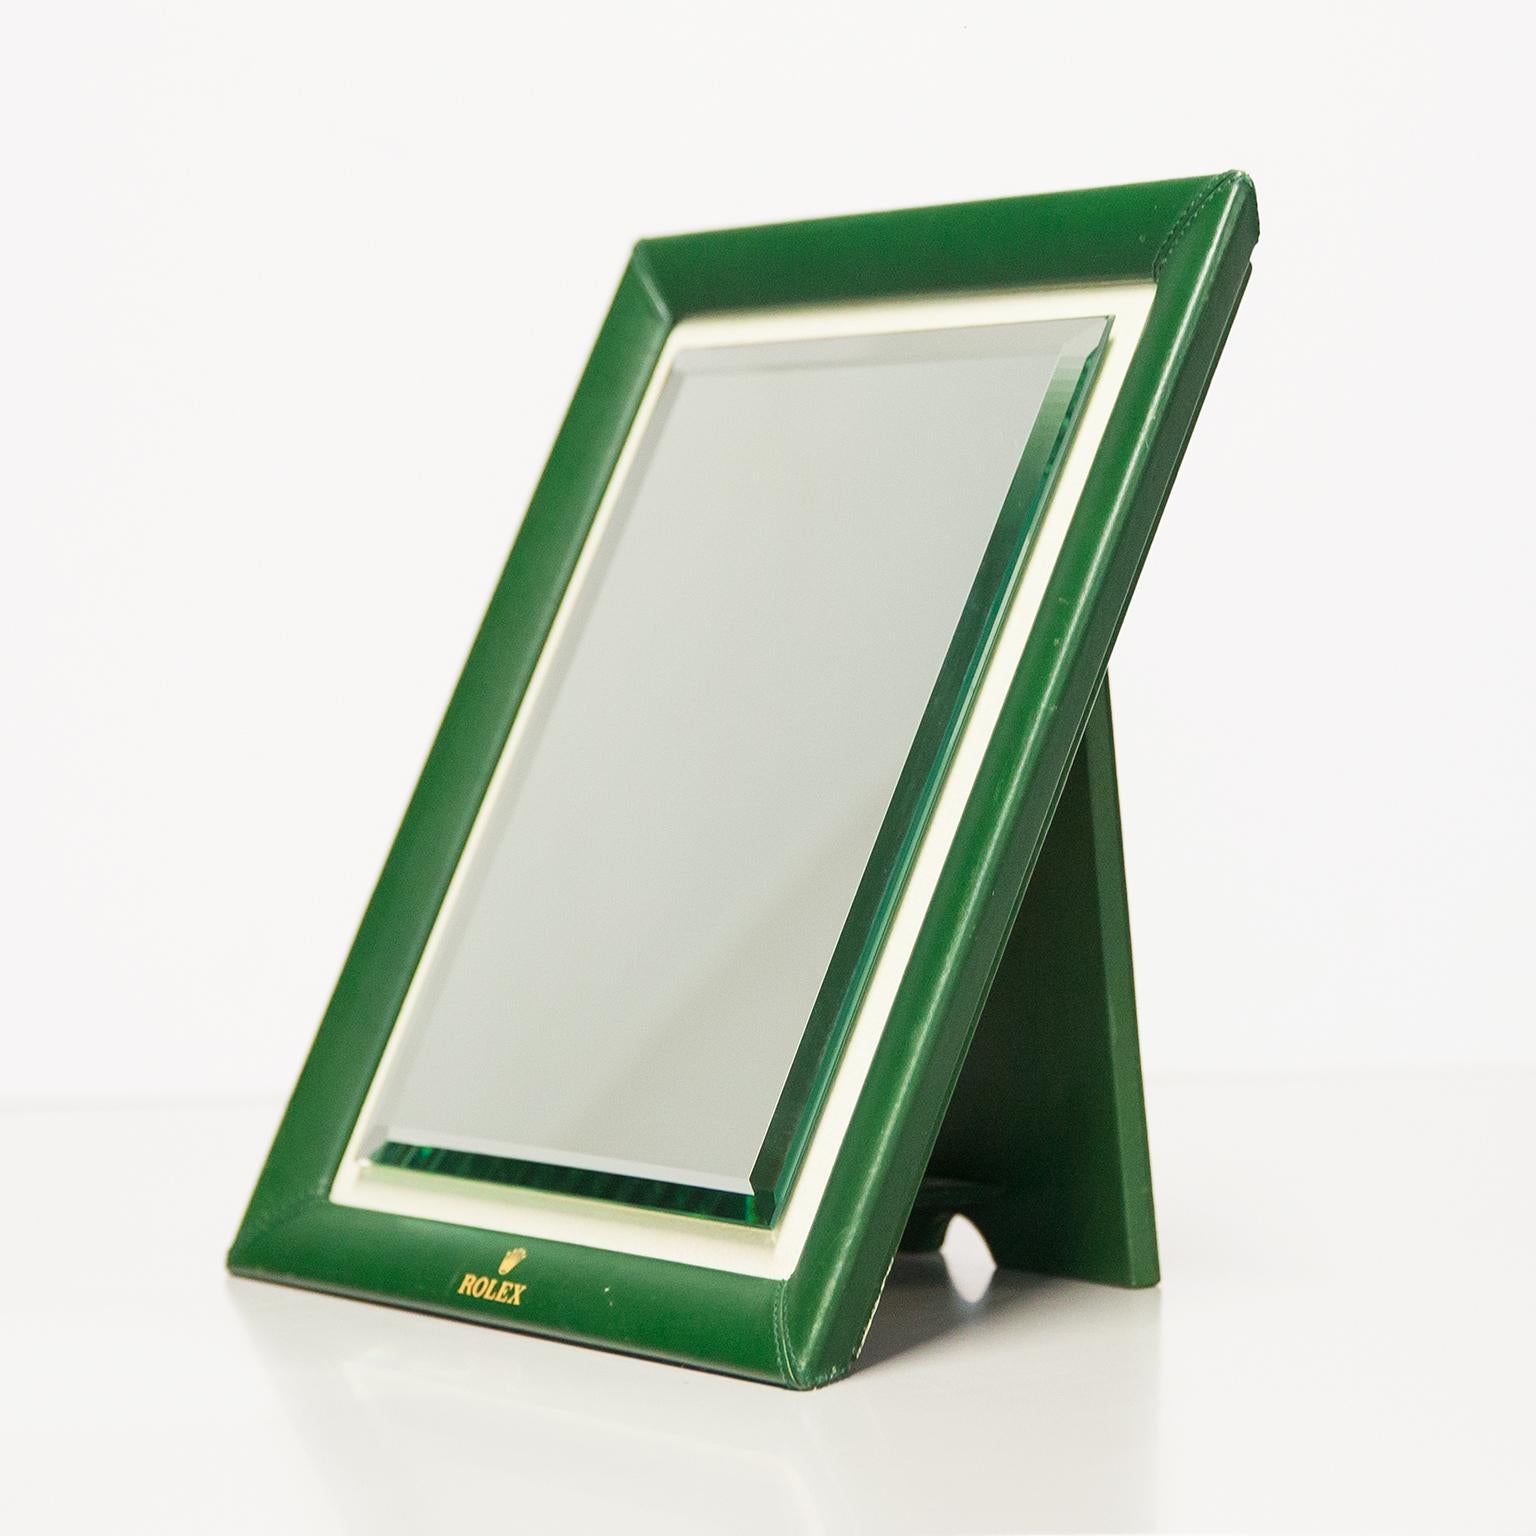 Original Rolex table top shop mirror in green leather and polished mirror glass in a suede leather rim. A highly collectible piece and a must have for any watch lover or horology enthusiast. In very good vintage condition with no rips or tears on